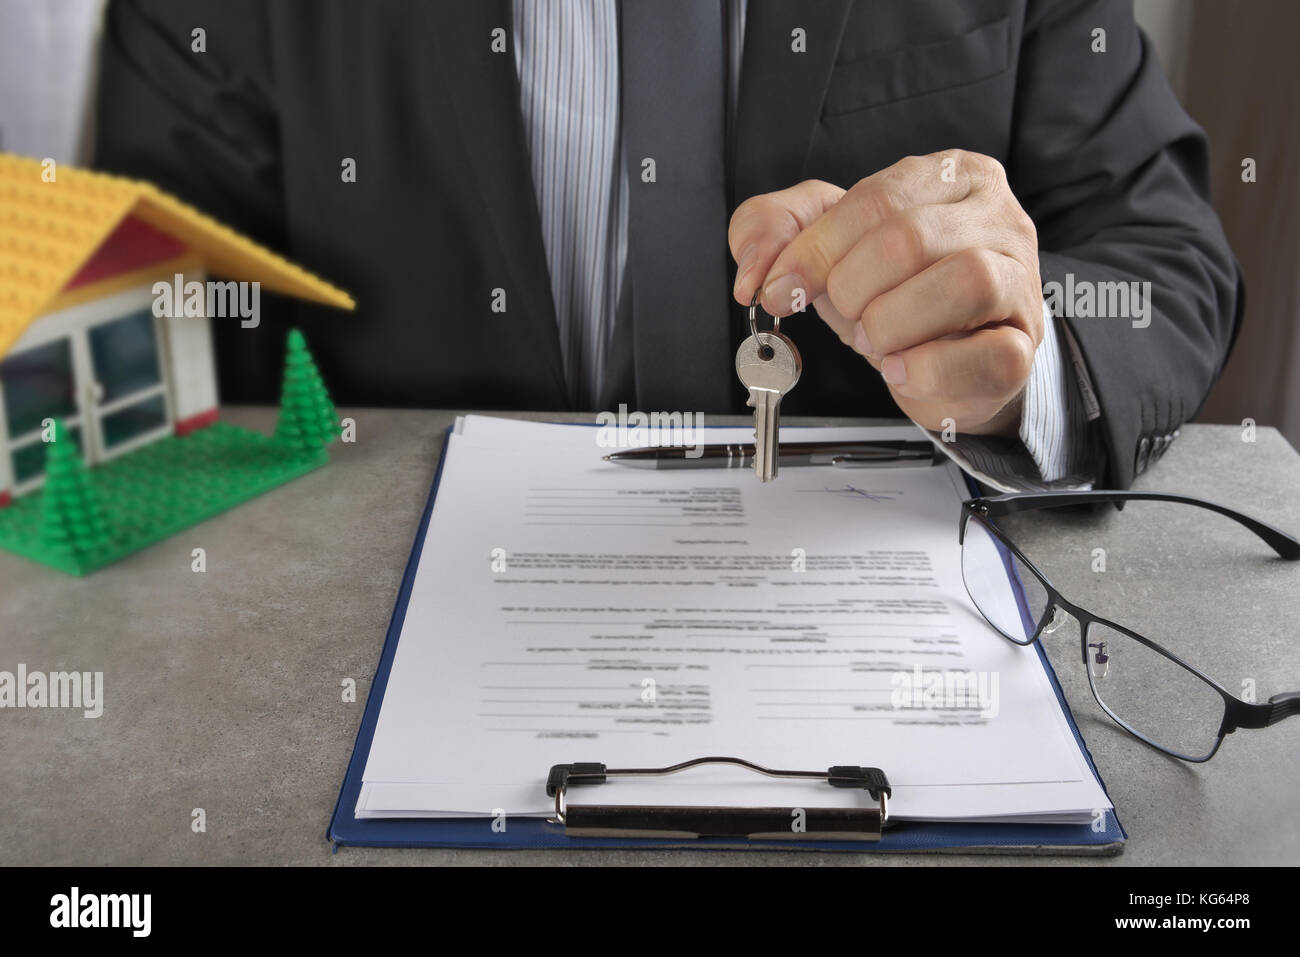 Signed house purchase agreement after the loan approval Stock Photo